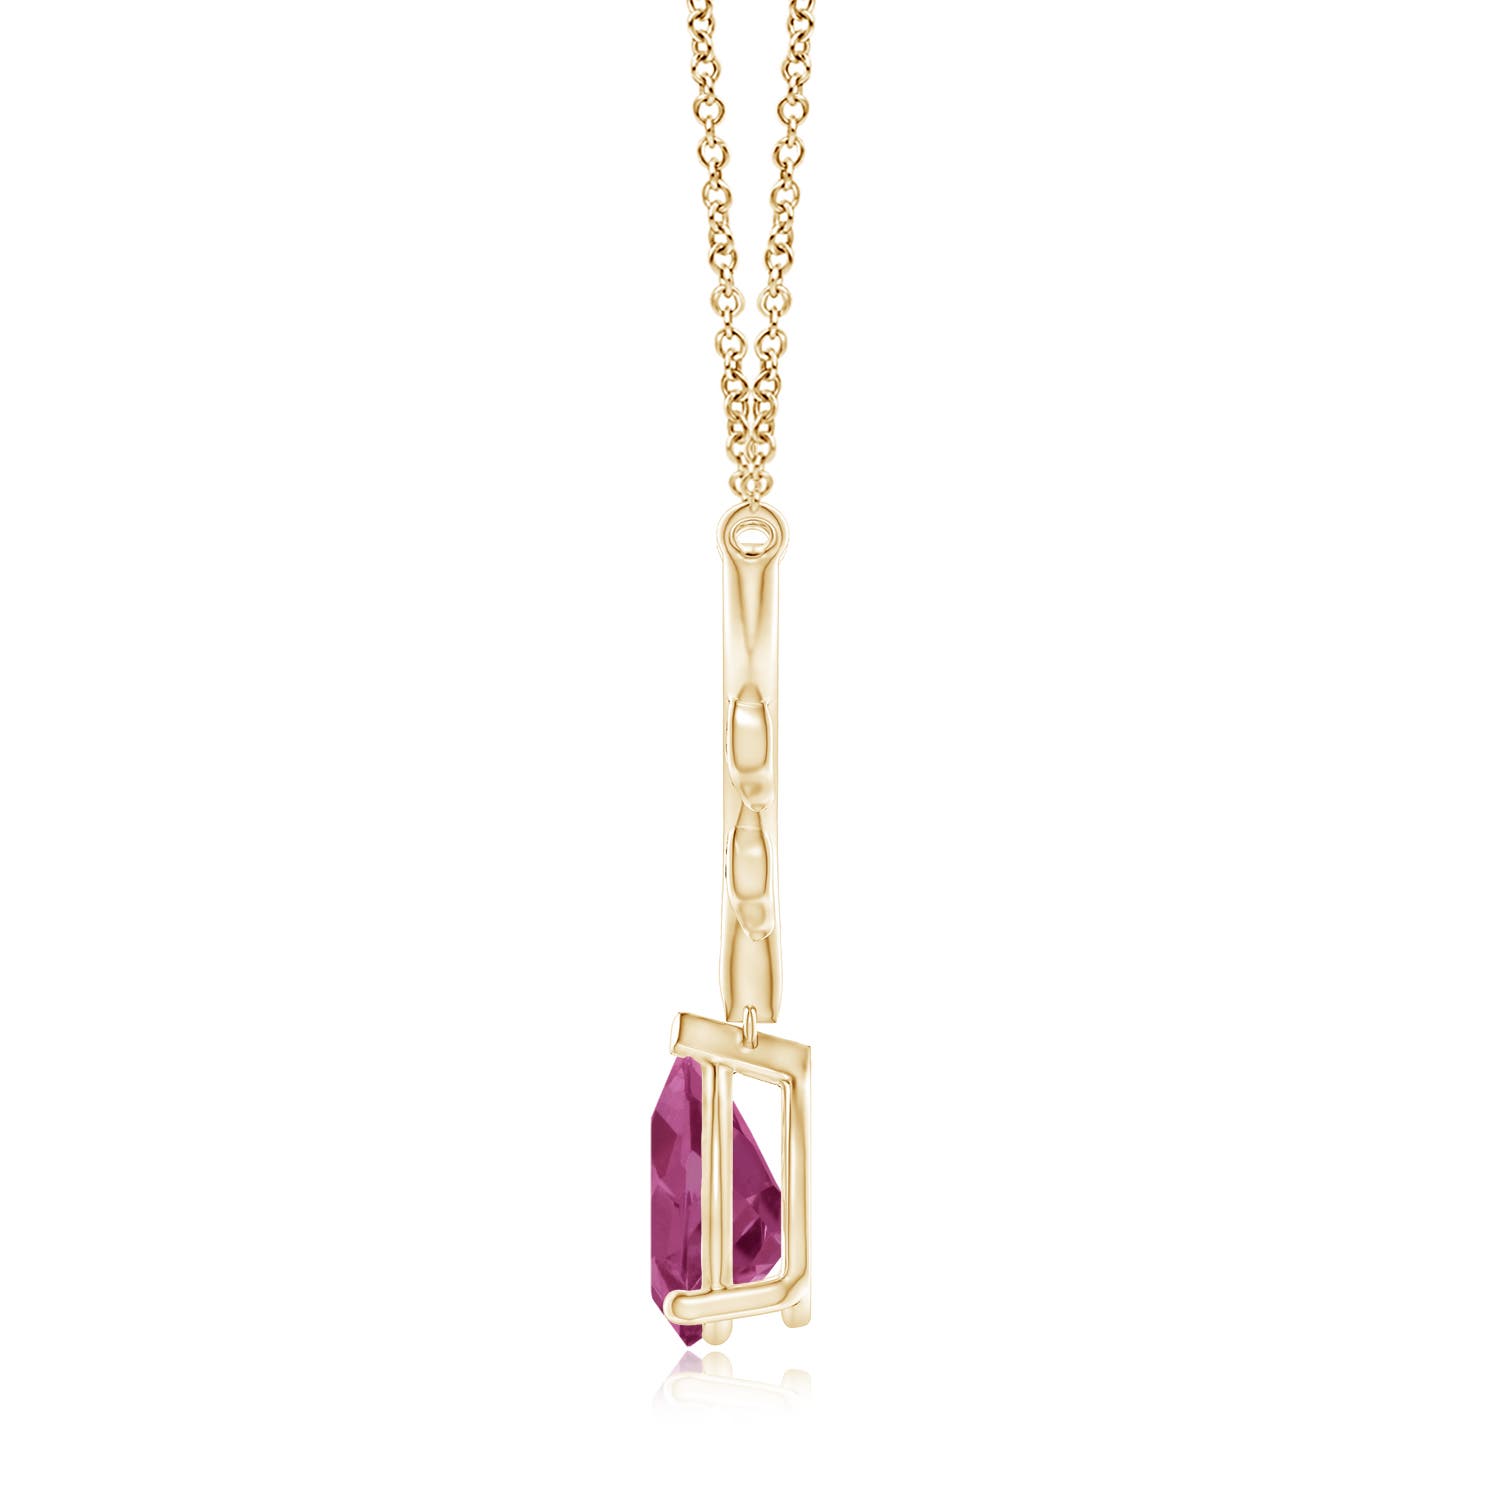 Pink Tourmaline Necklace with Gold Plated Toggle Clasp – Beads of Paradise